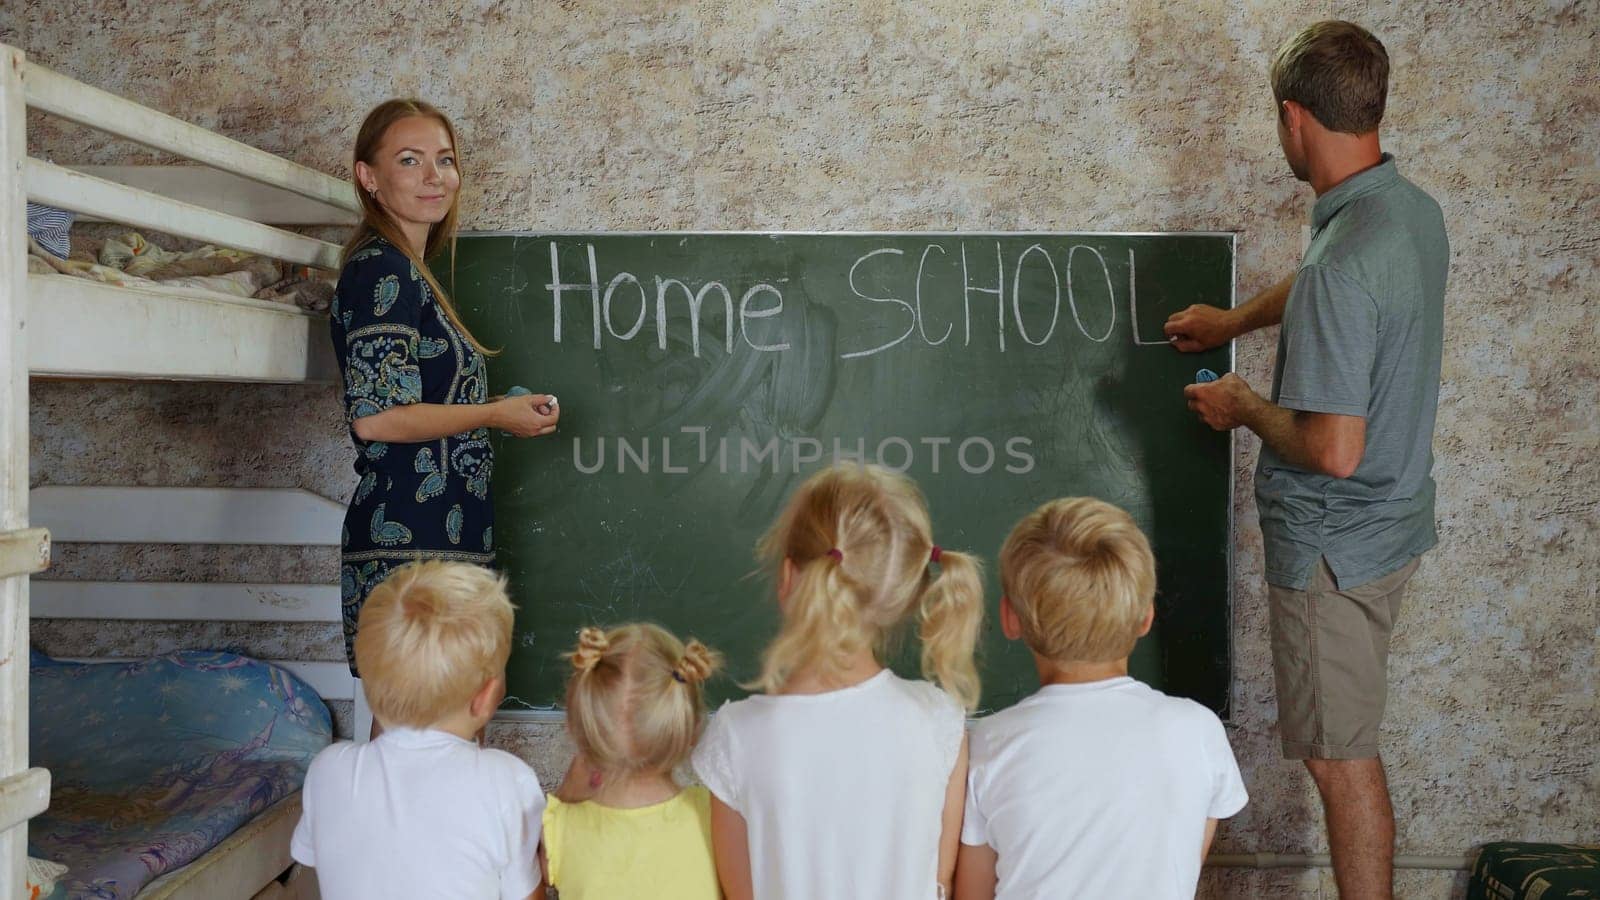 Home school concept. Parents write Home School on the blackboard. by DovidPro